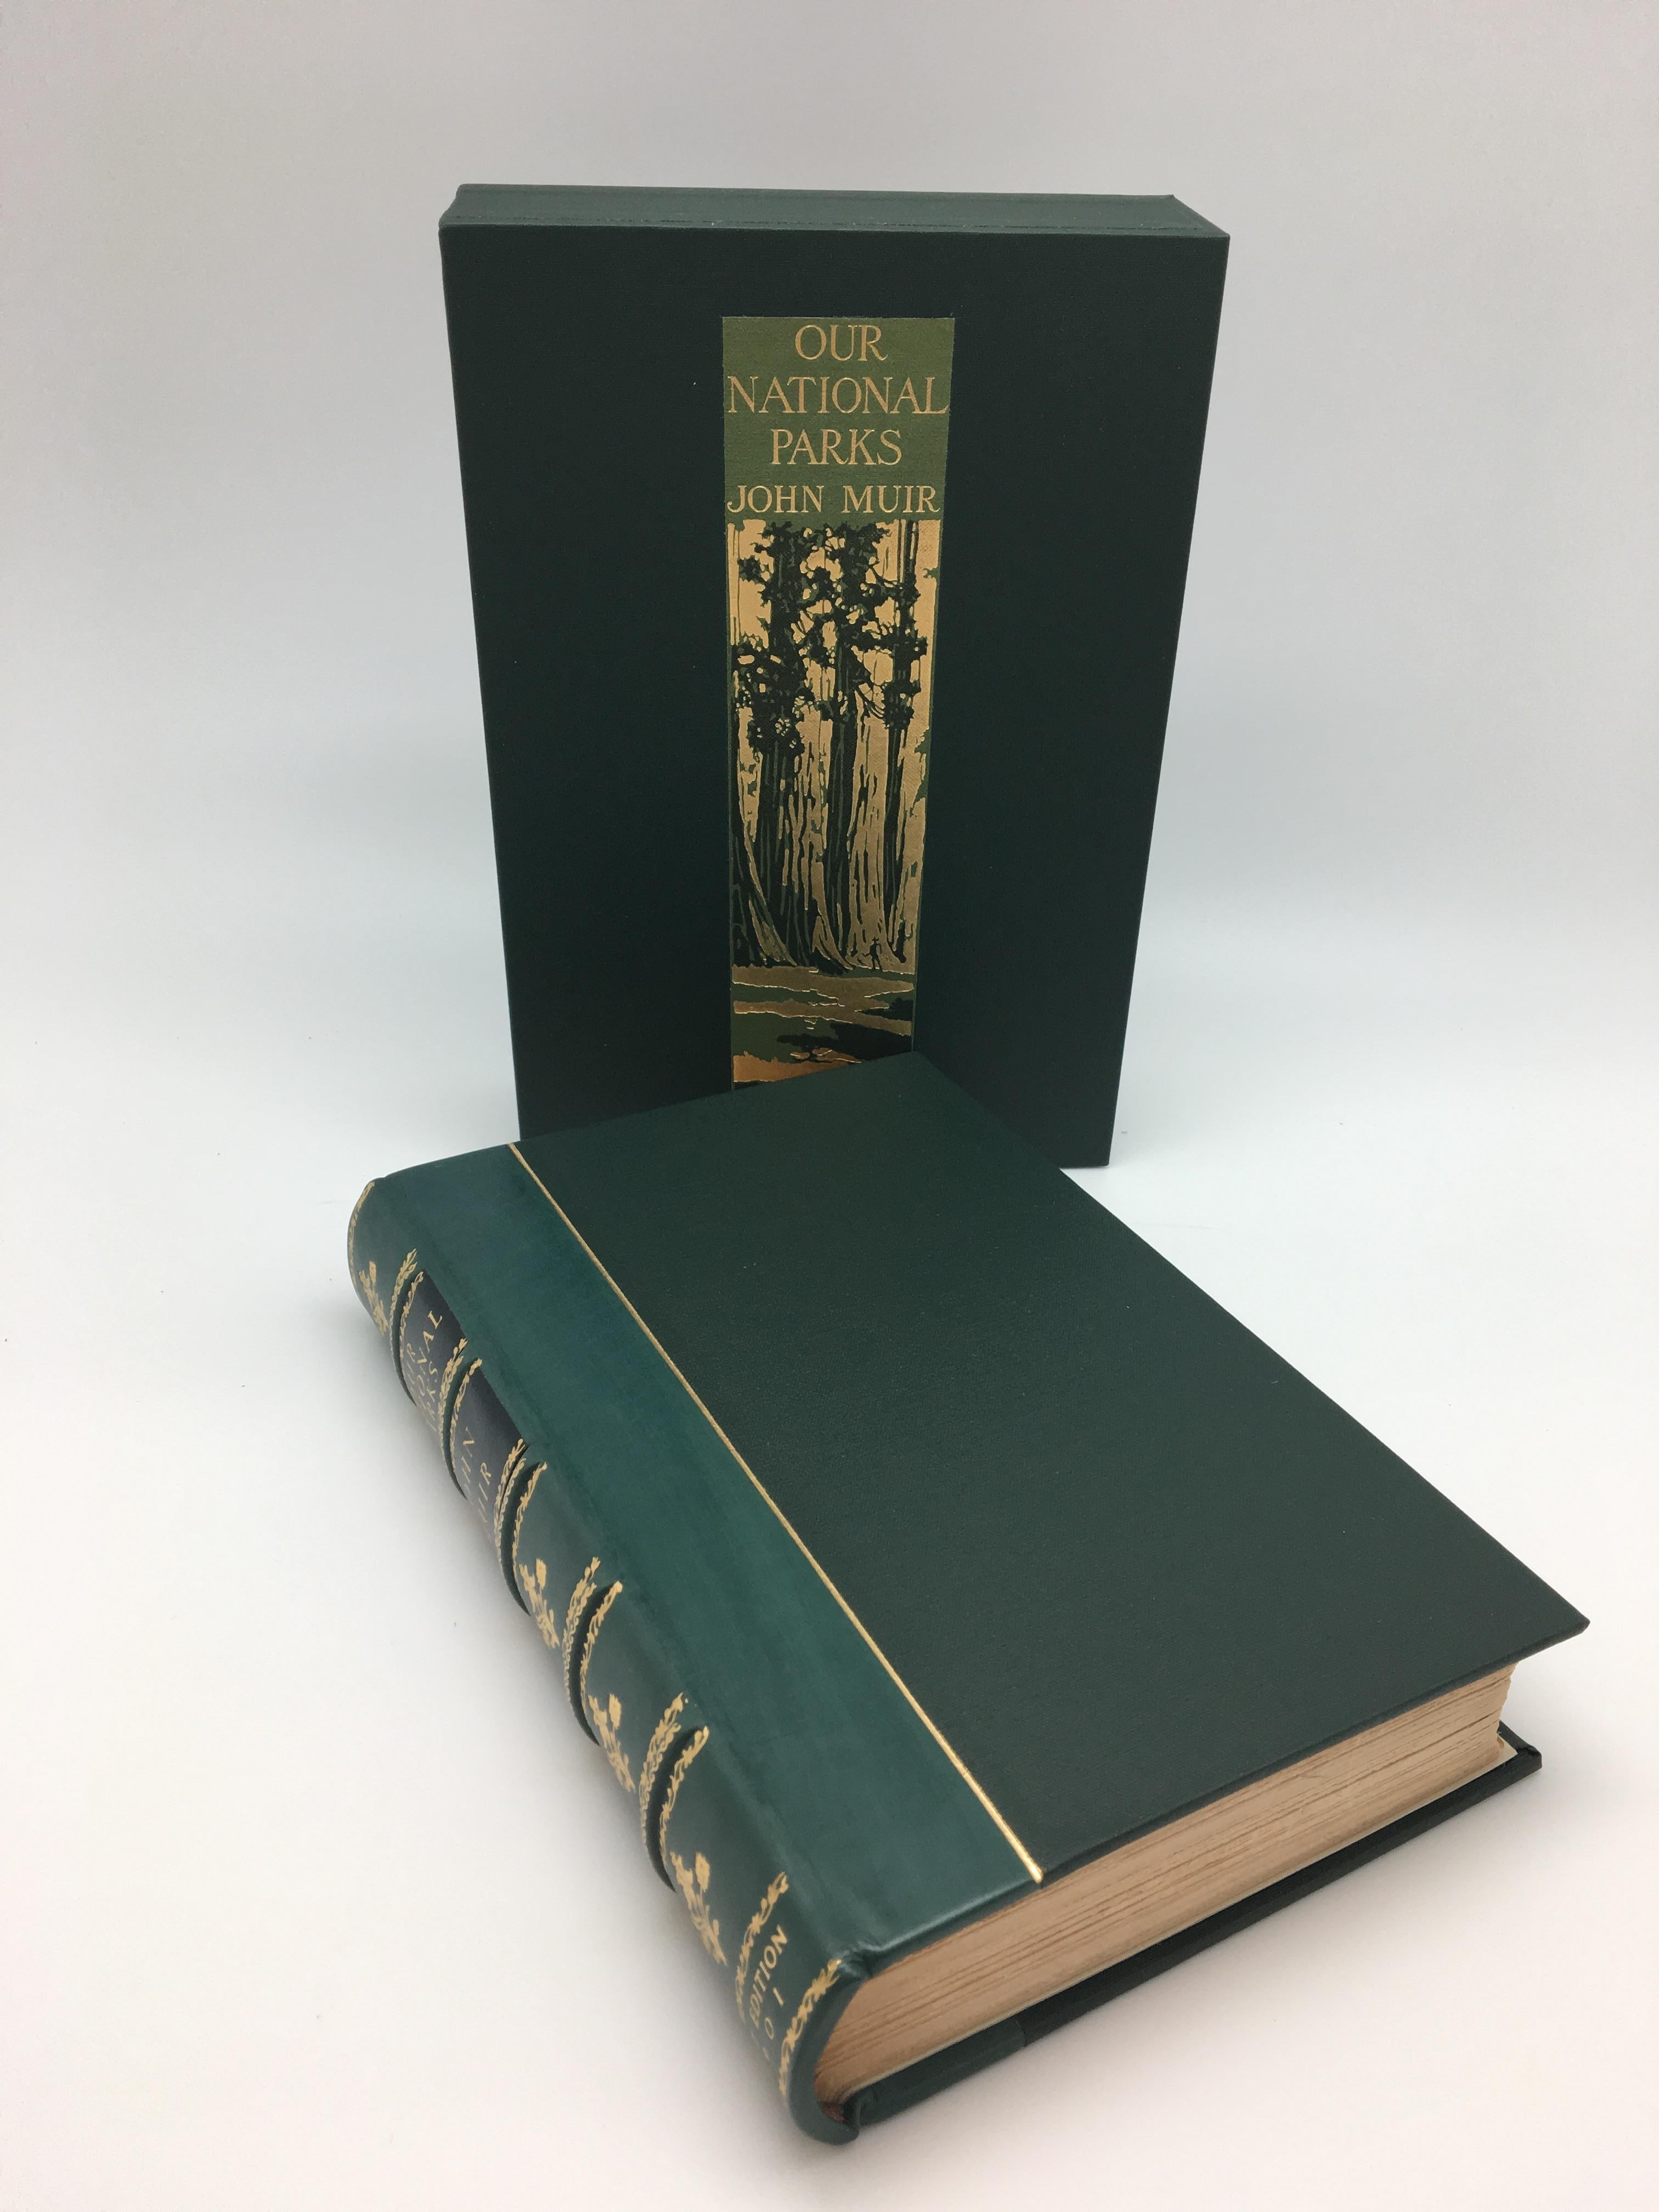 Muir, John, Our National Parks. Boston and New York: Houghton, Mifflin, and Co., 1901. Octavo, rebound in green cloth and quarter leather. Accompanied by a matching slipcase.

This first edition copy of Our National Parks by John Muir was